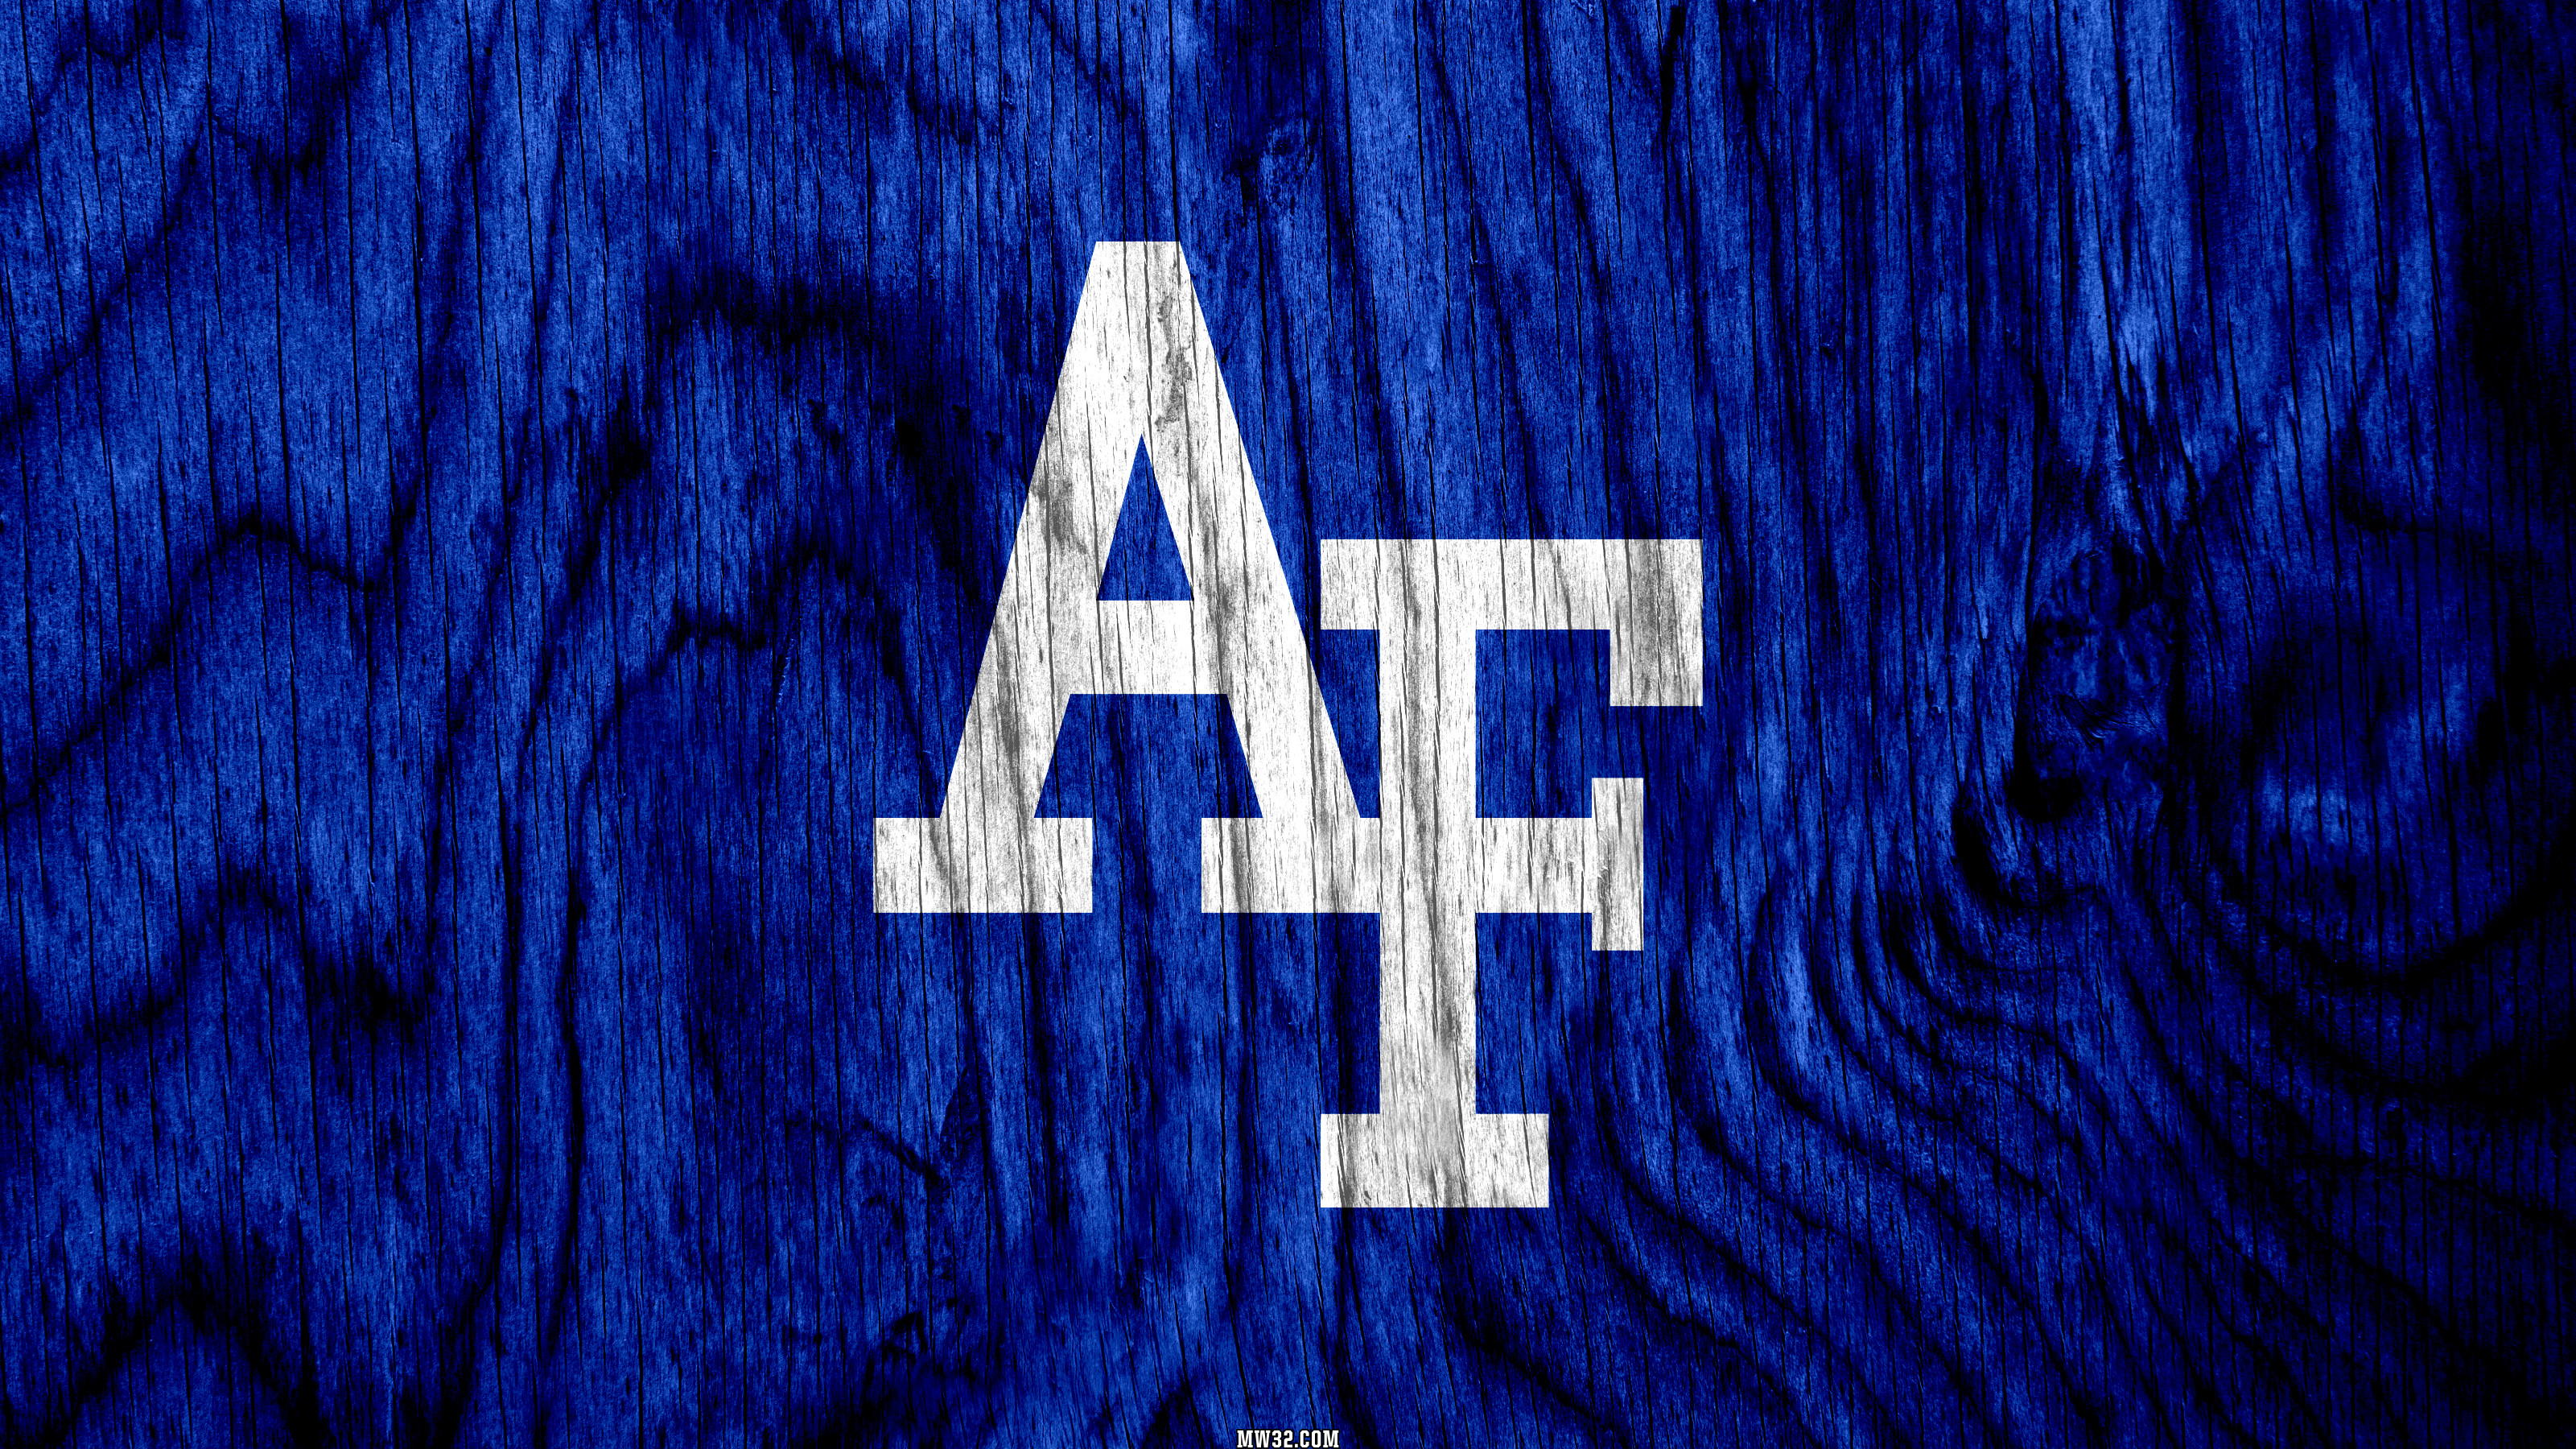 Air Force Falcons Tickets